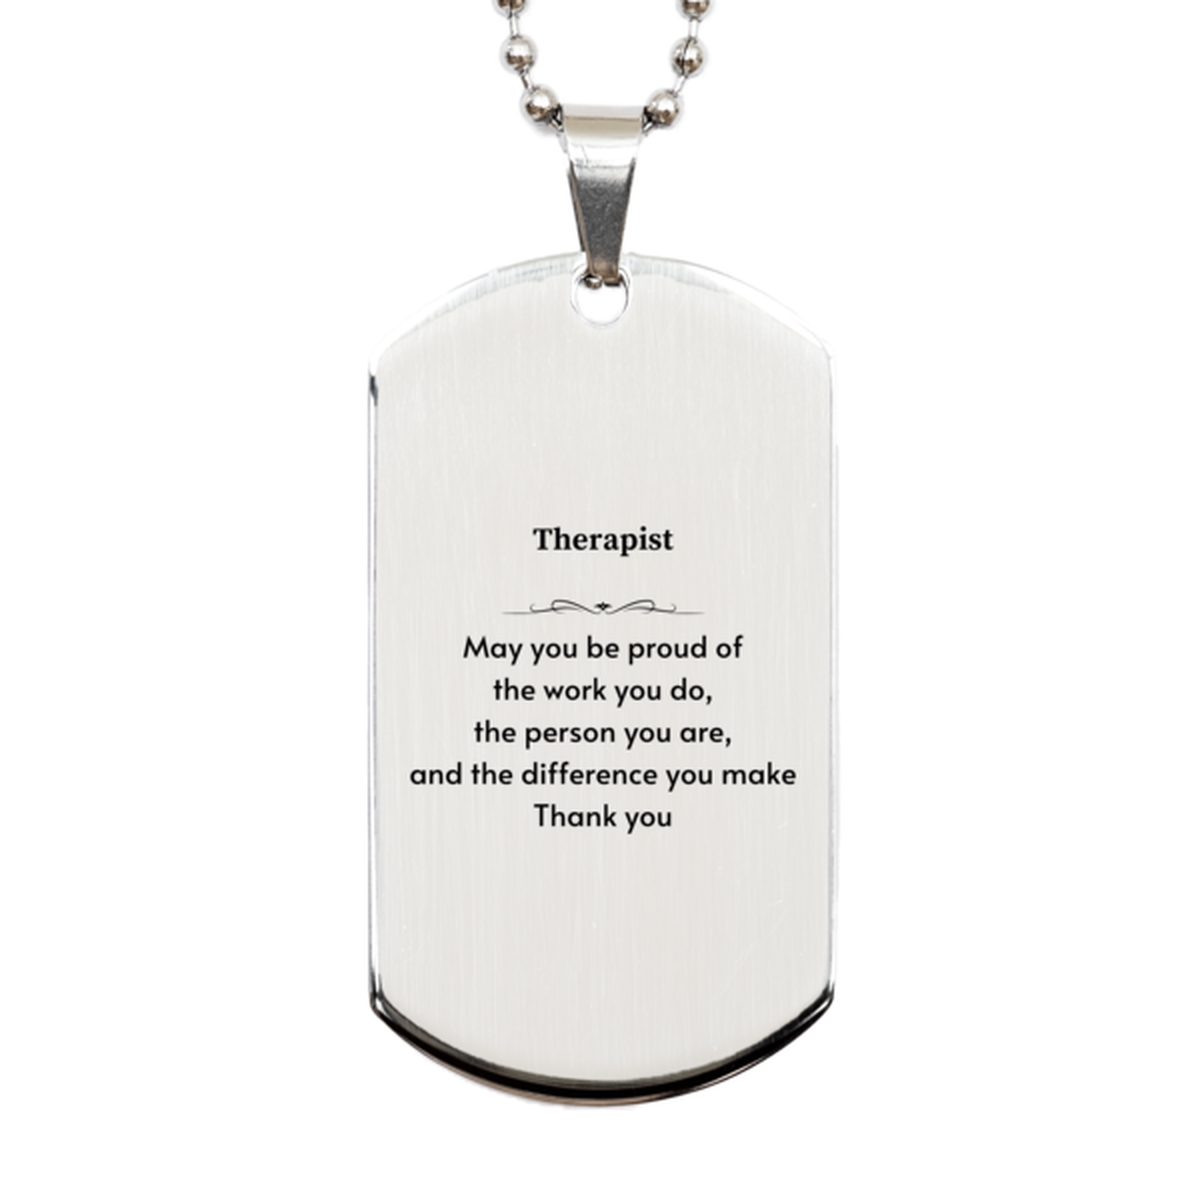 Heartwarming Silver Dog Tag Retirement Coworkers Gifts for Therapist, Therapist May You be proud of the work you do, the person you are Gifts for Boss Men Women Friends